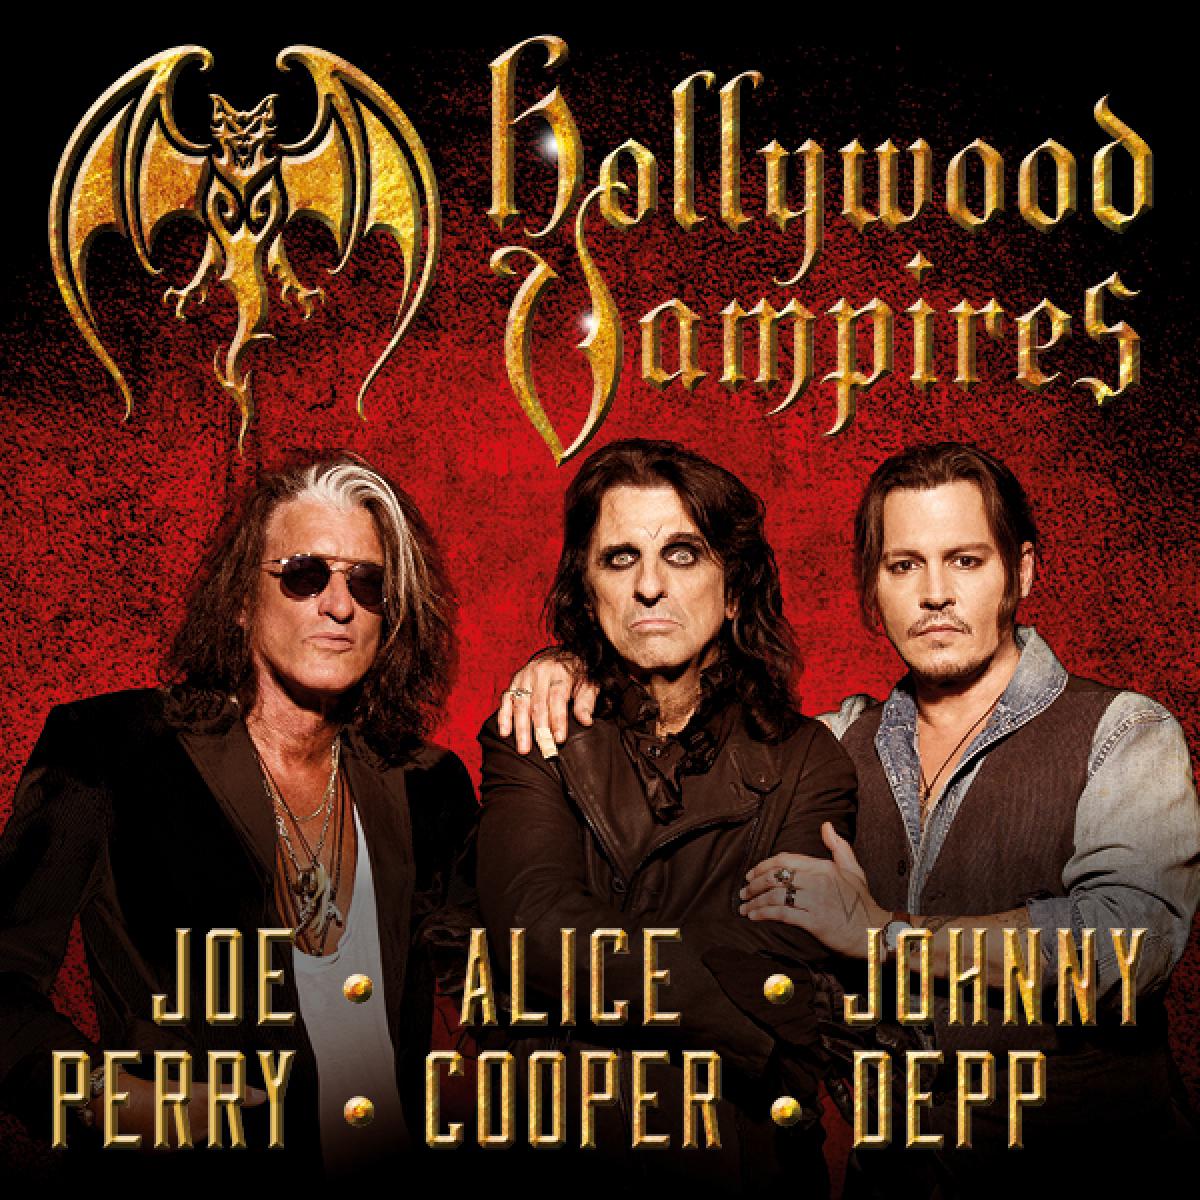 hollywood vampires tour in usa